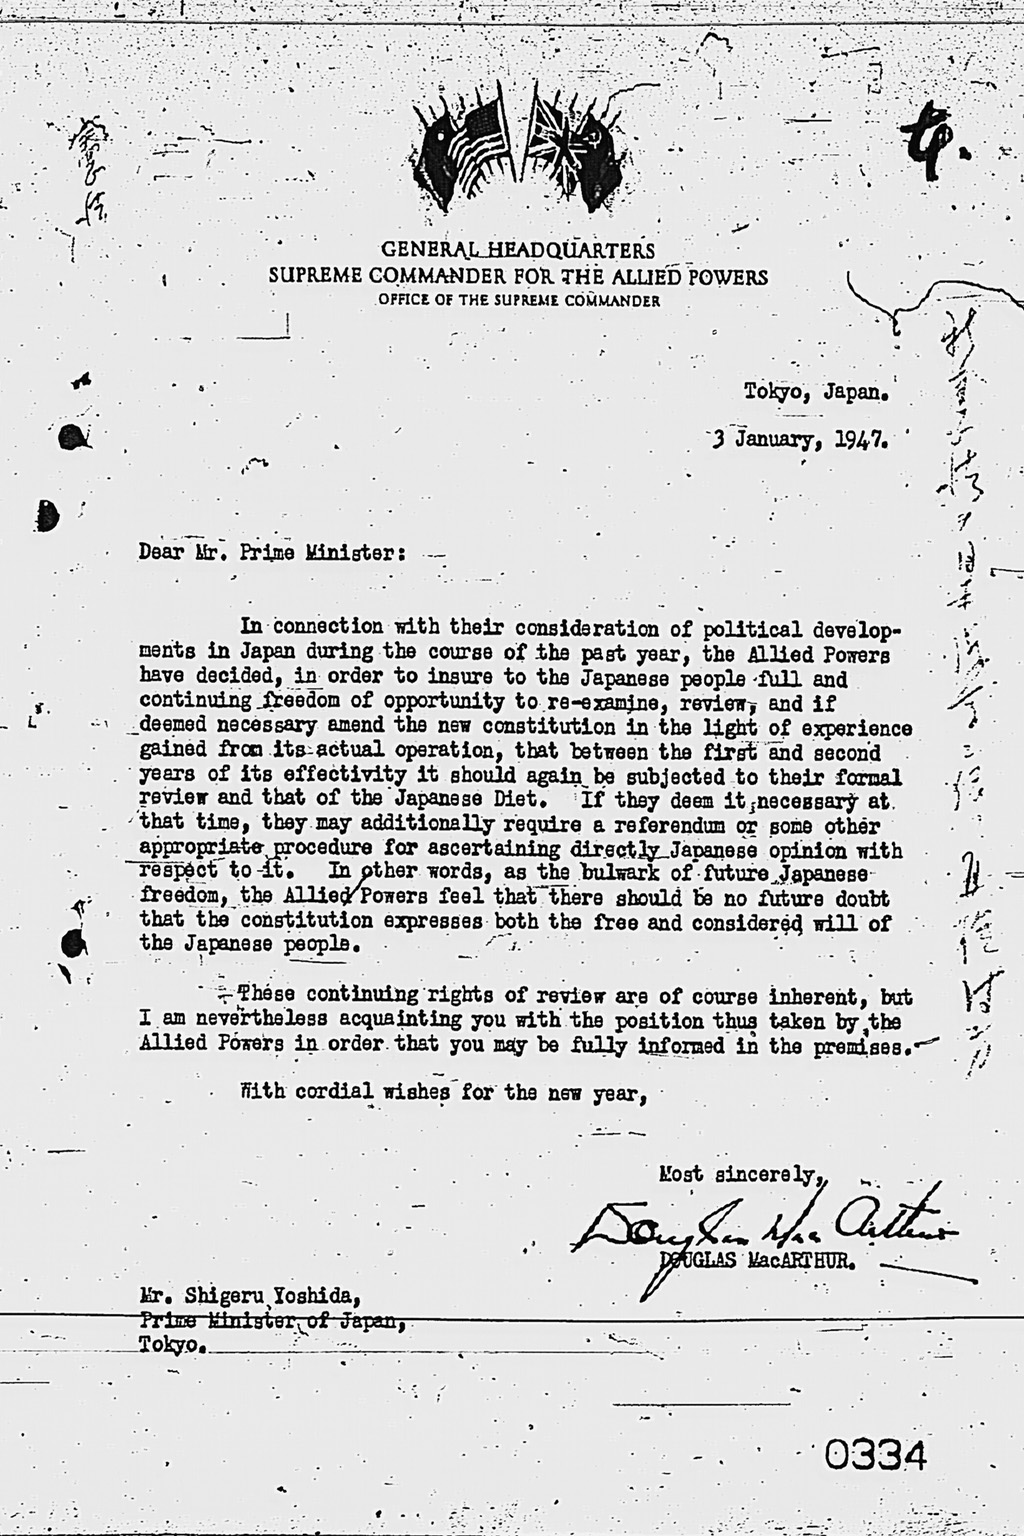 [Letter from Douglas MacArthur to Prime Minister dated January 3, 1947](Larger image)